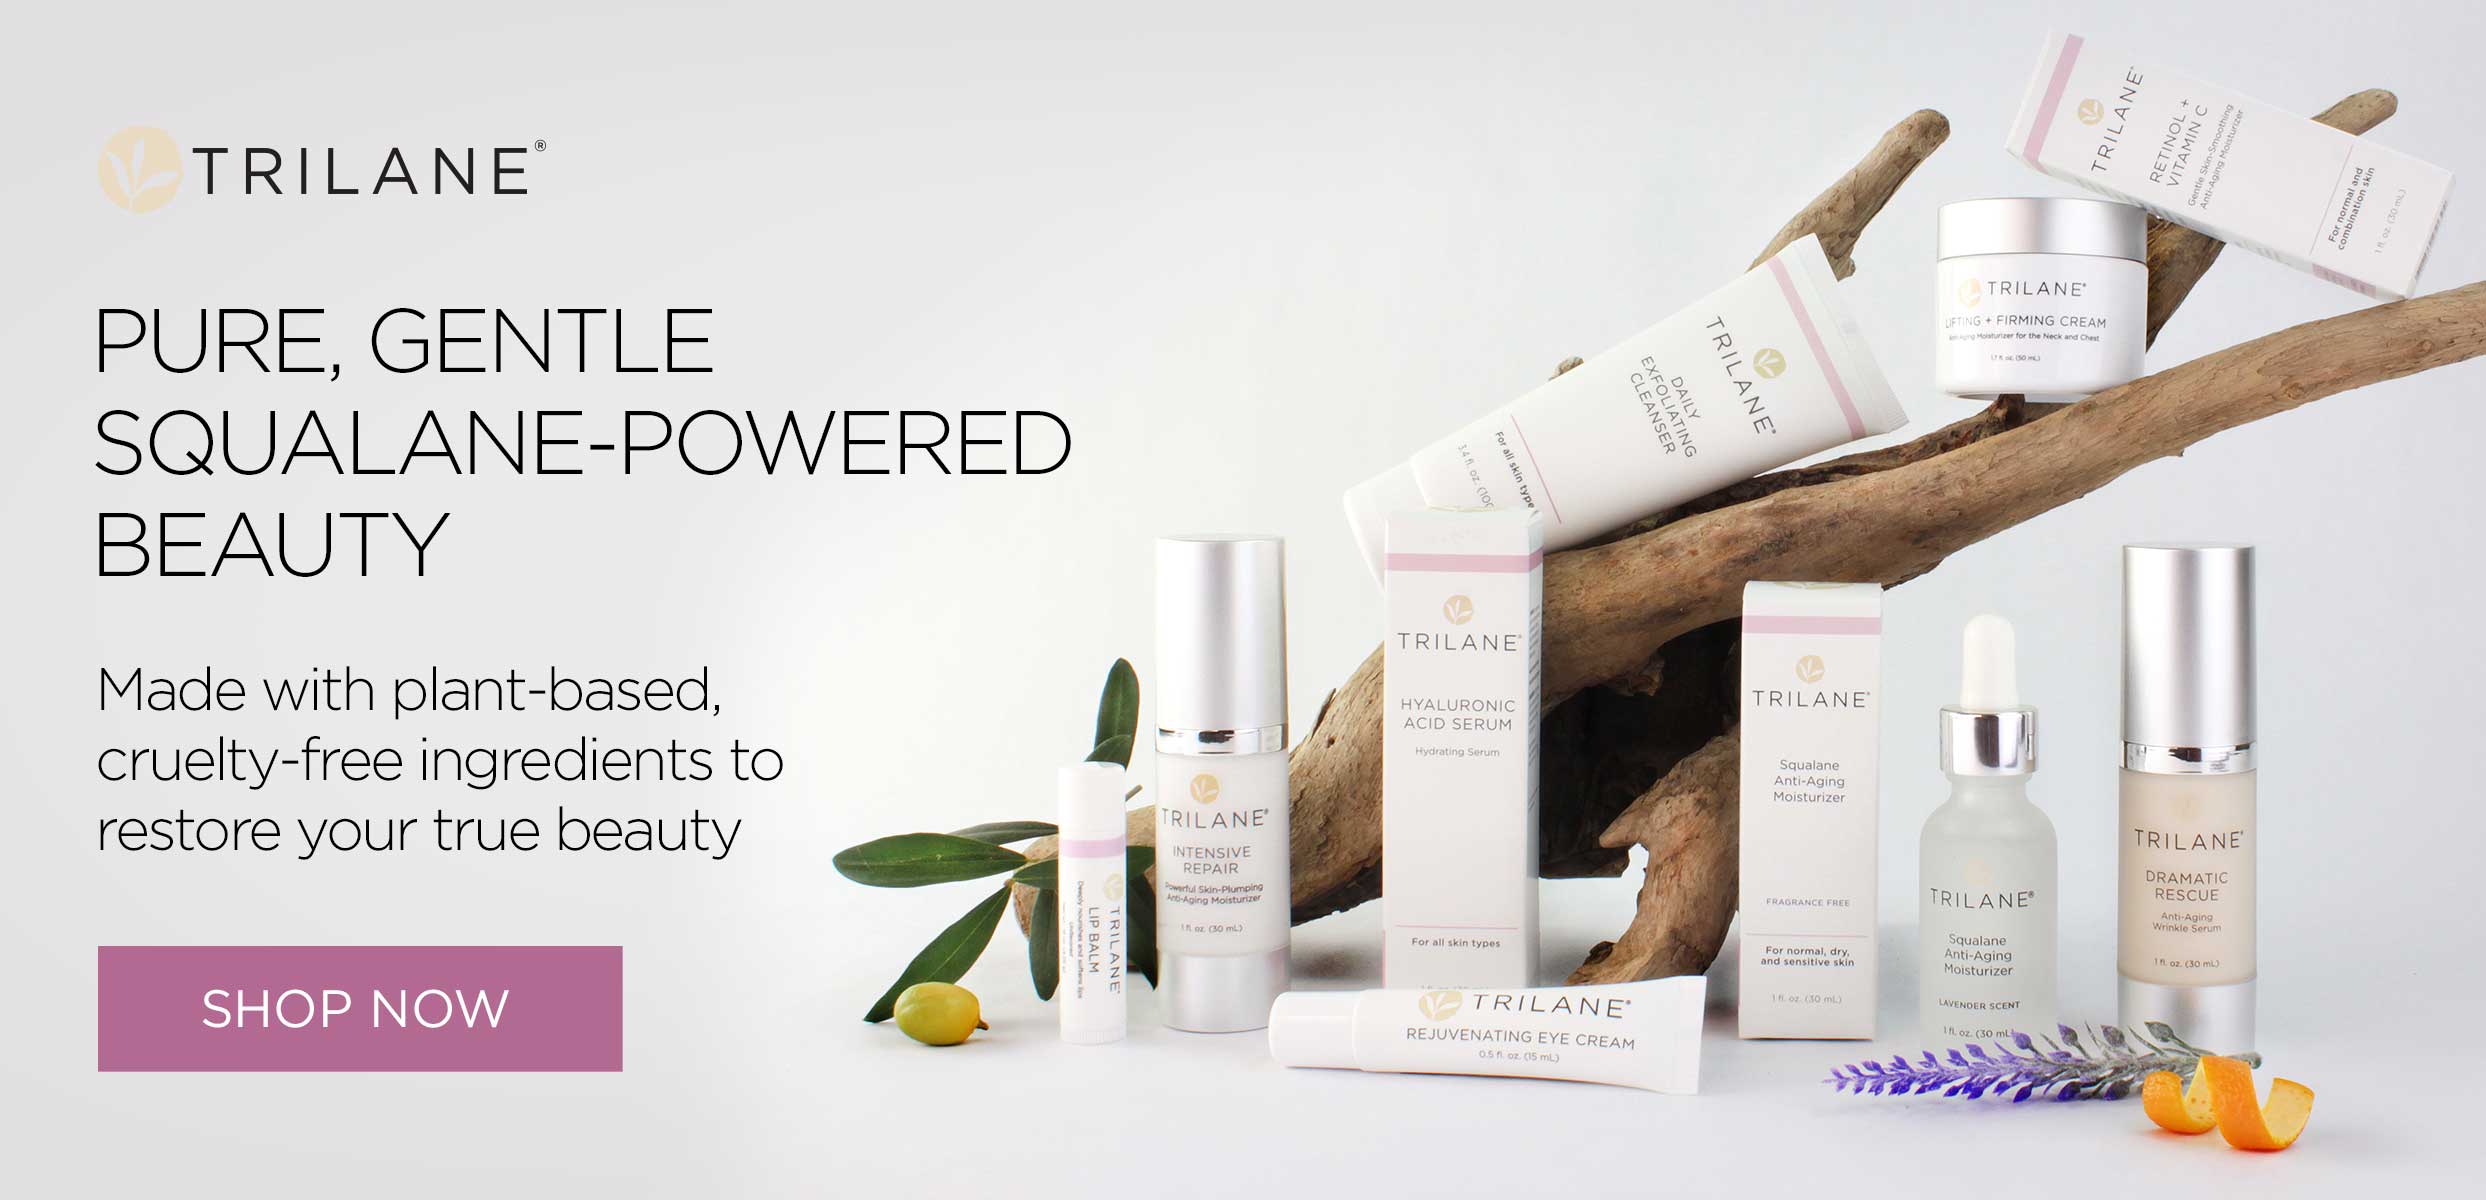 Trilane Skincare products with driftwood and ingredients